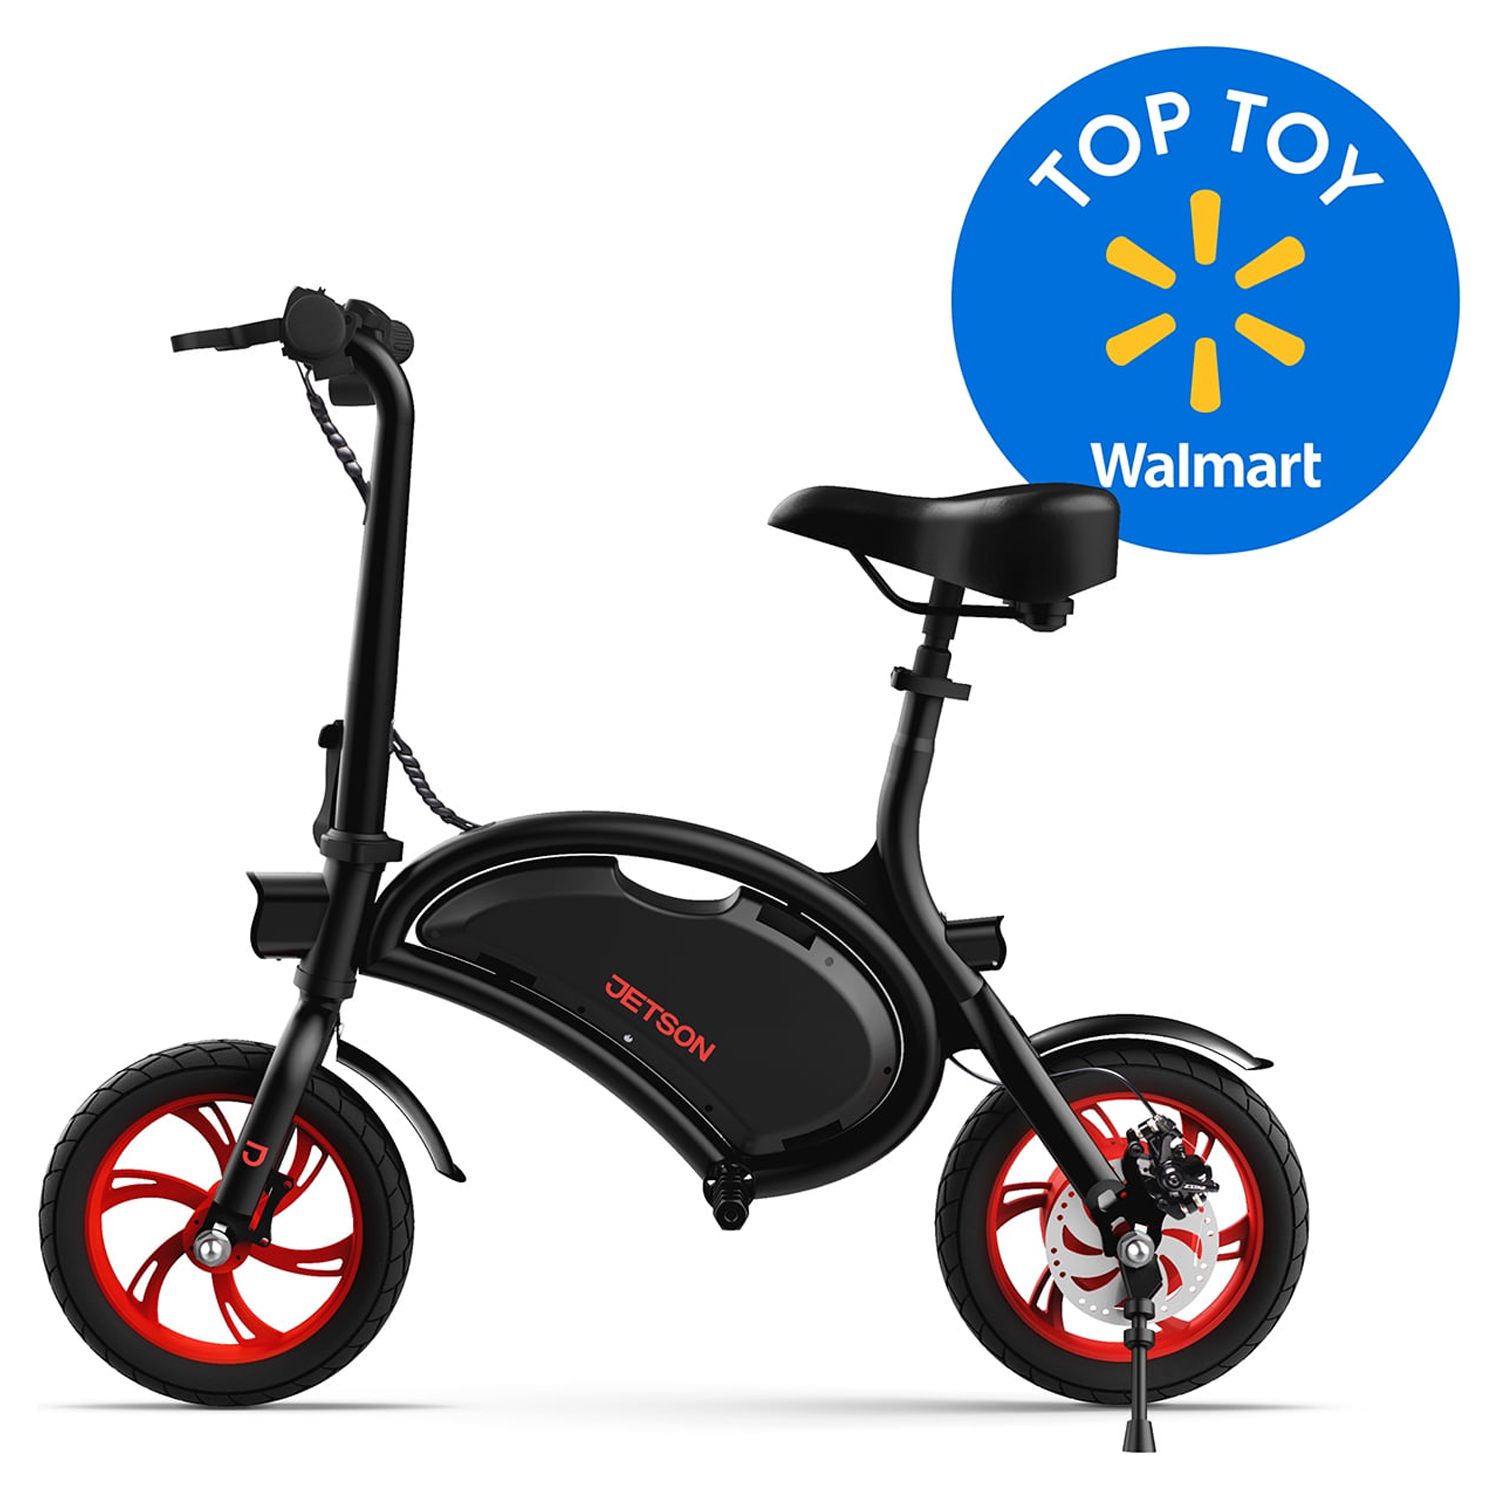 Jetson Bolt Folding Electric Ride-On with Twist Throttle, Cruise Control, Up to 15.5 mph, Black - image 5 of 17